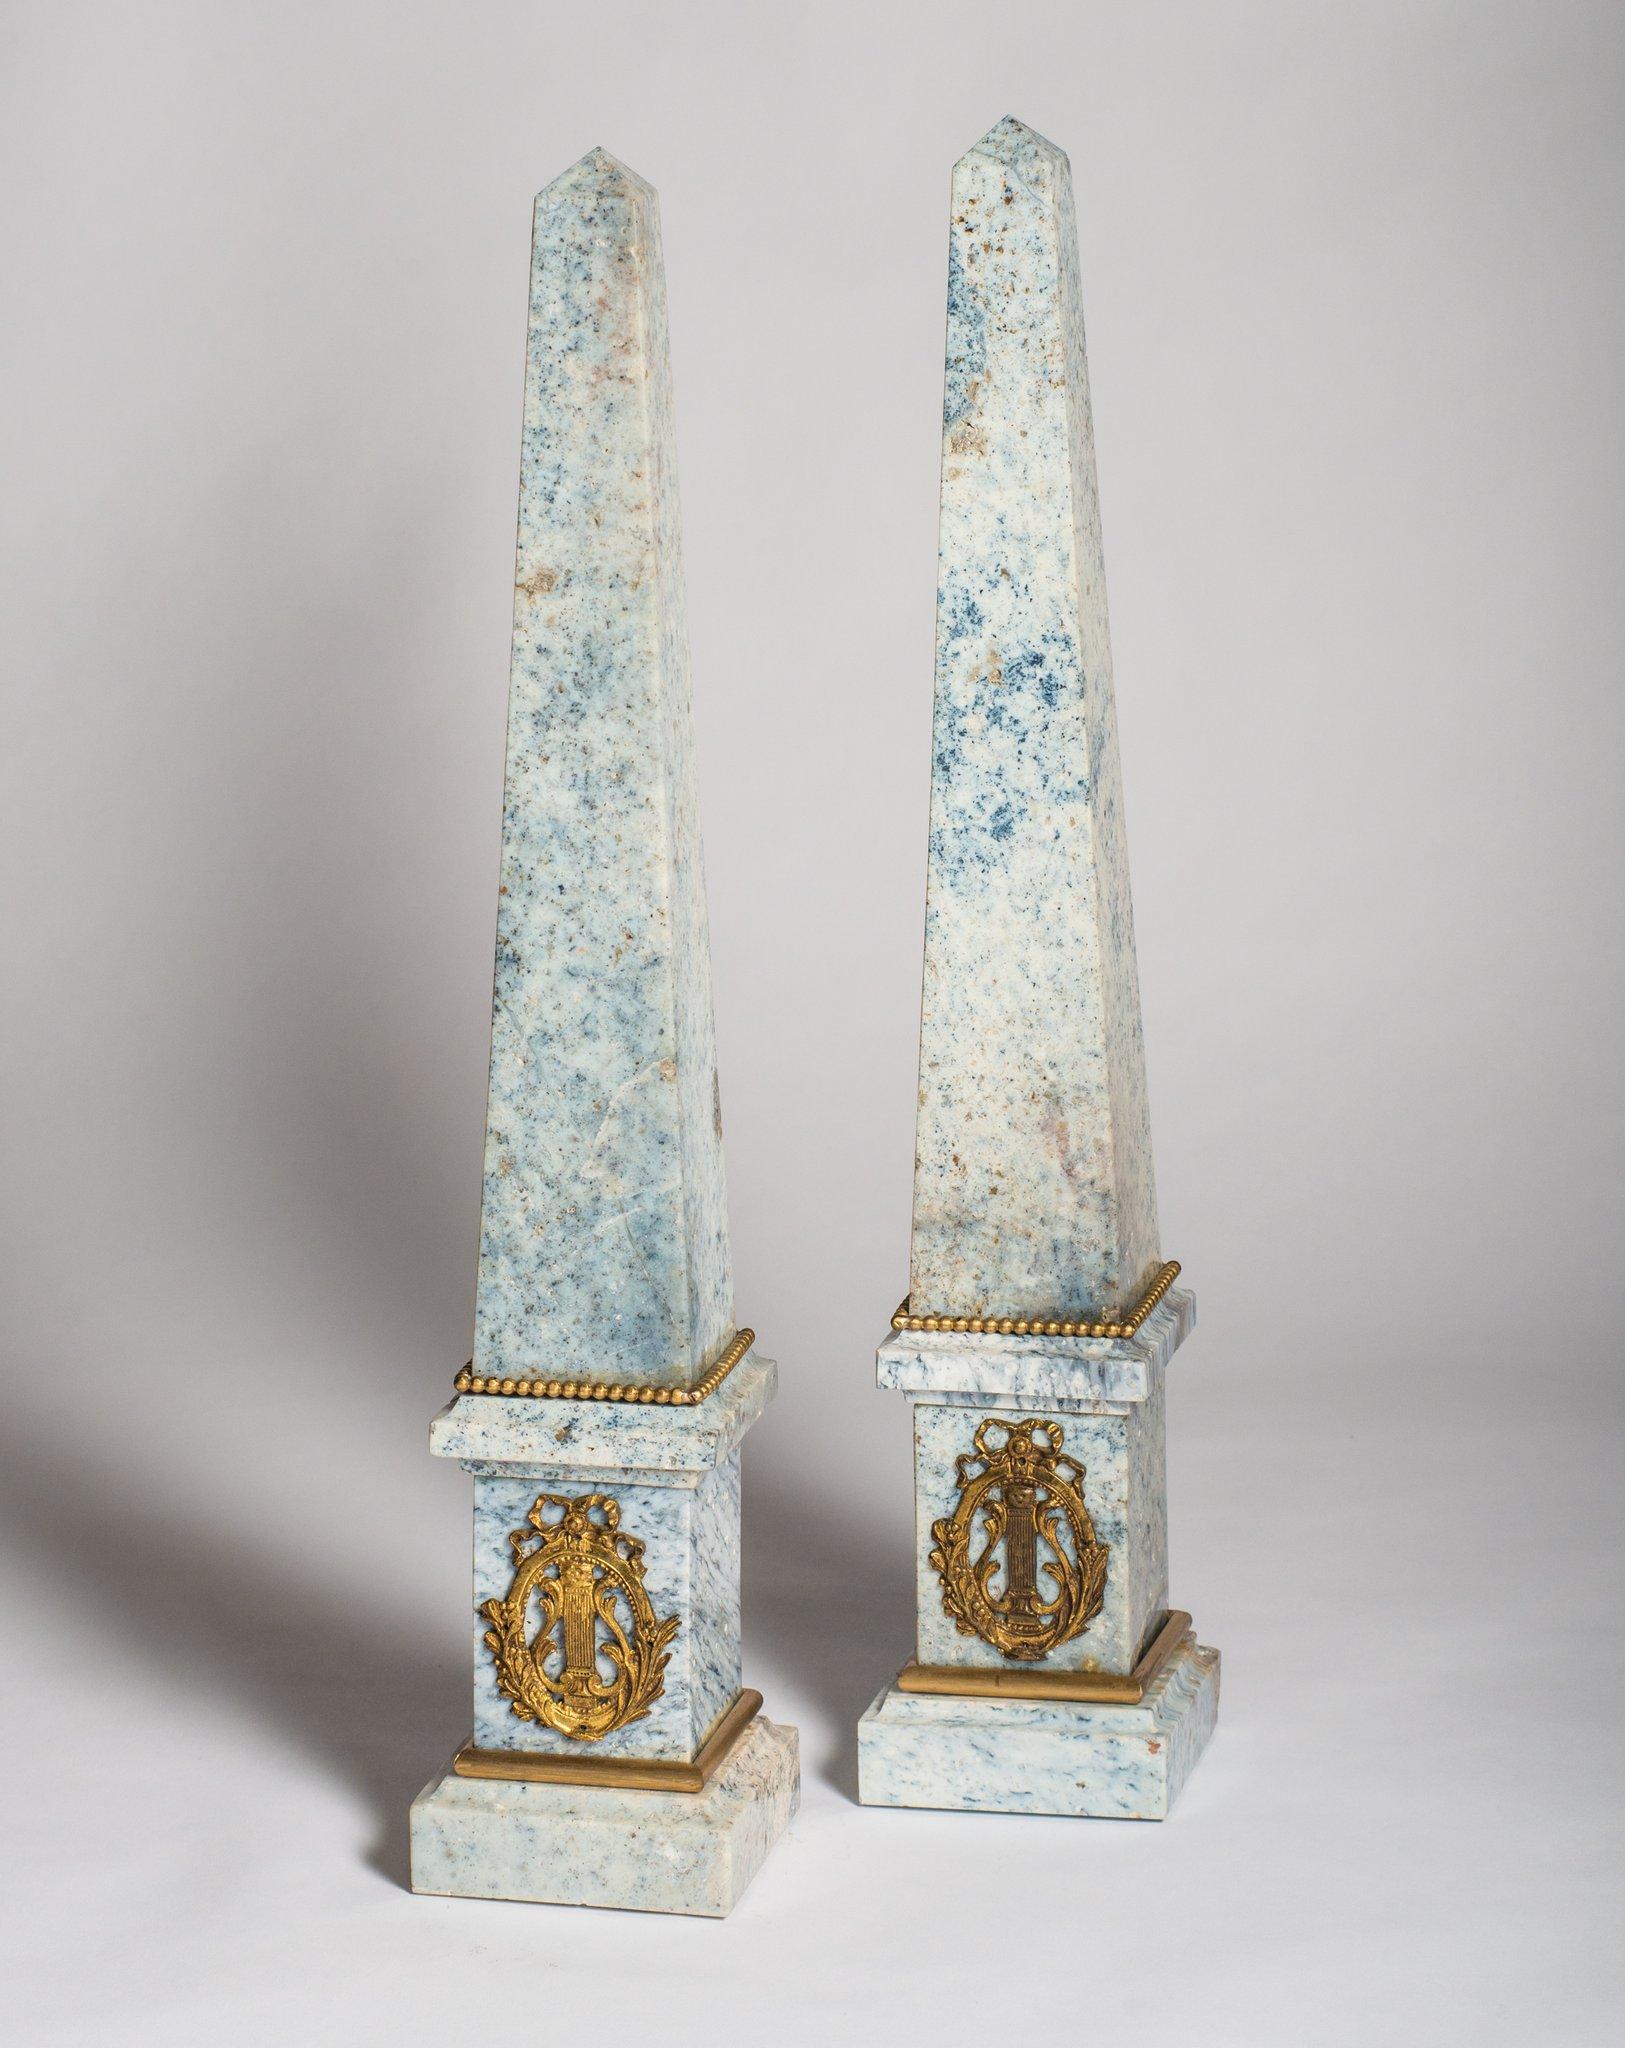 A pair of magnificent antique French Empire pale blue Jasper obelisks with original ormolu detail. Their grand size and proportion makes them highly desirable collectibles.